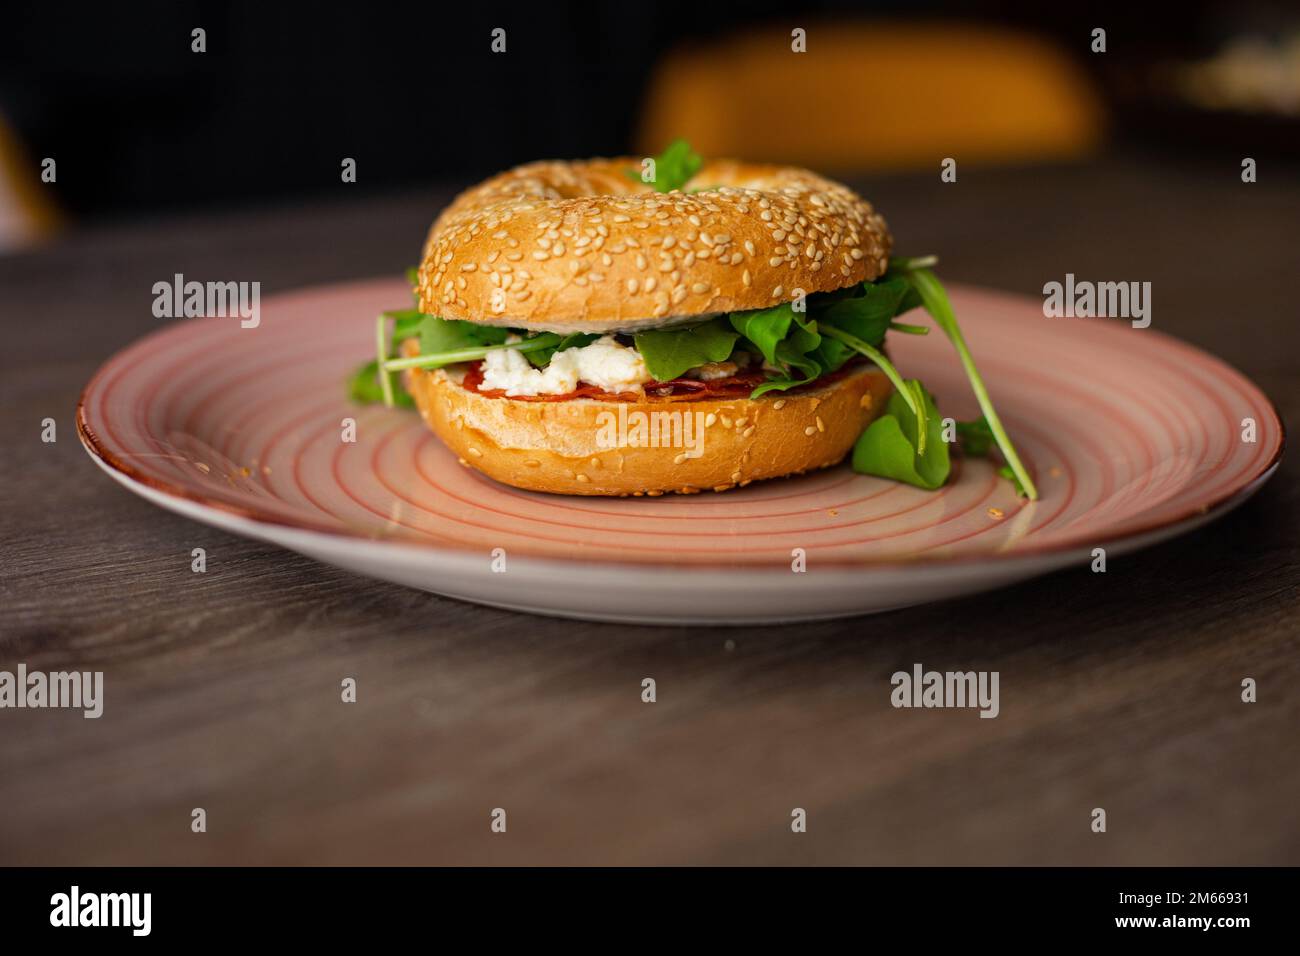 Delicious, yummy sesame donut burger with cheese and greenery filling, sauce served up on pink plate on wooden table Stock Photo